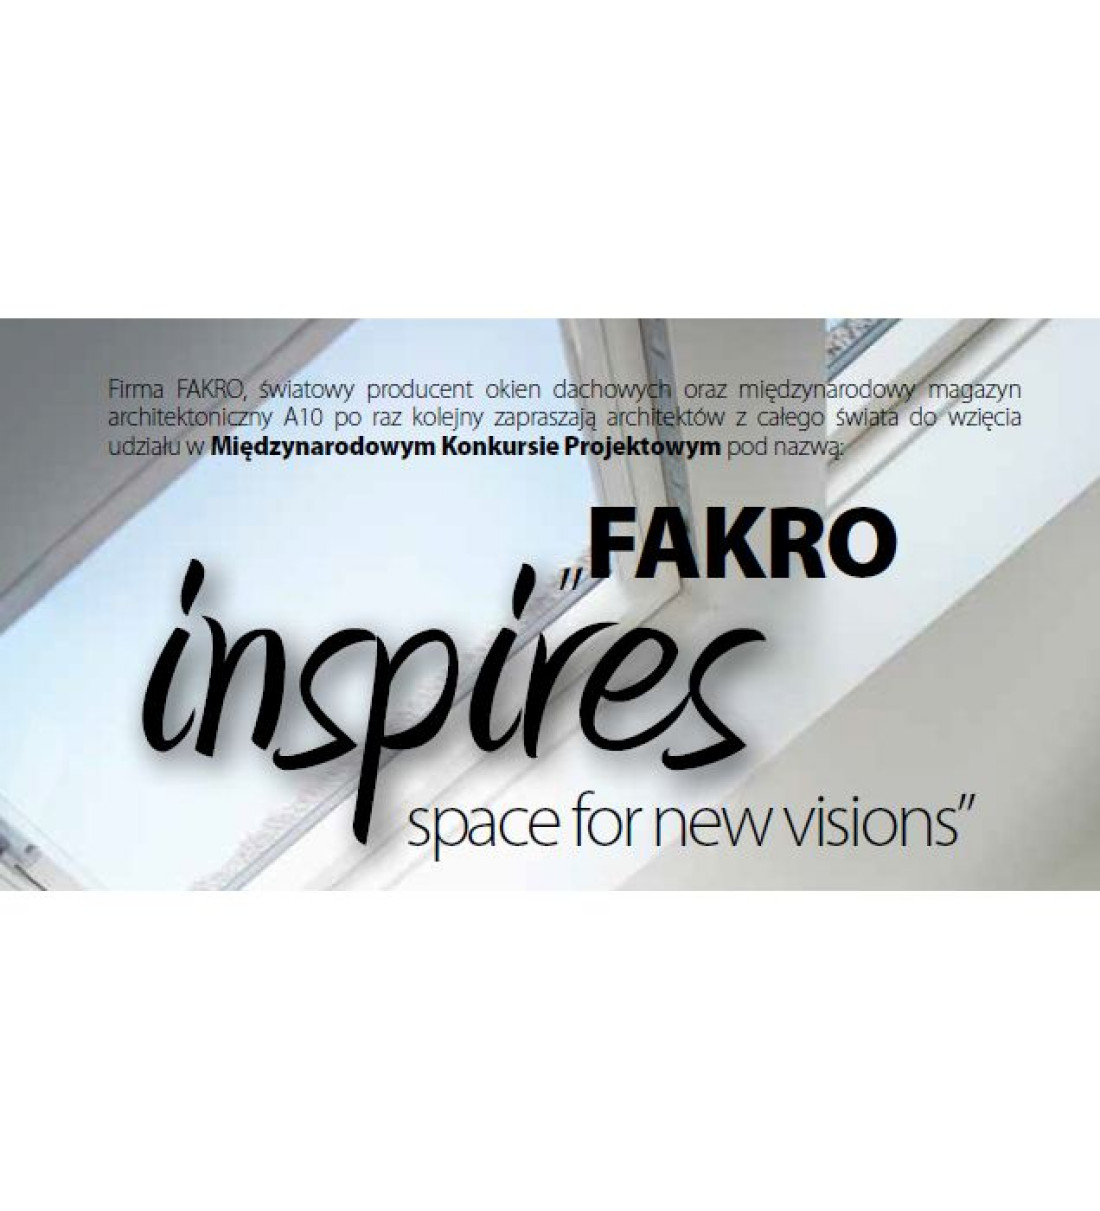 International Design Competition "FAKRO inspires – space for new visions"